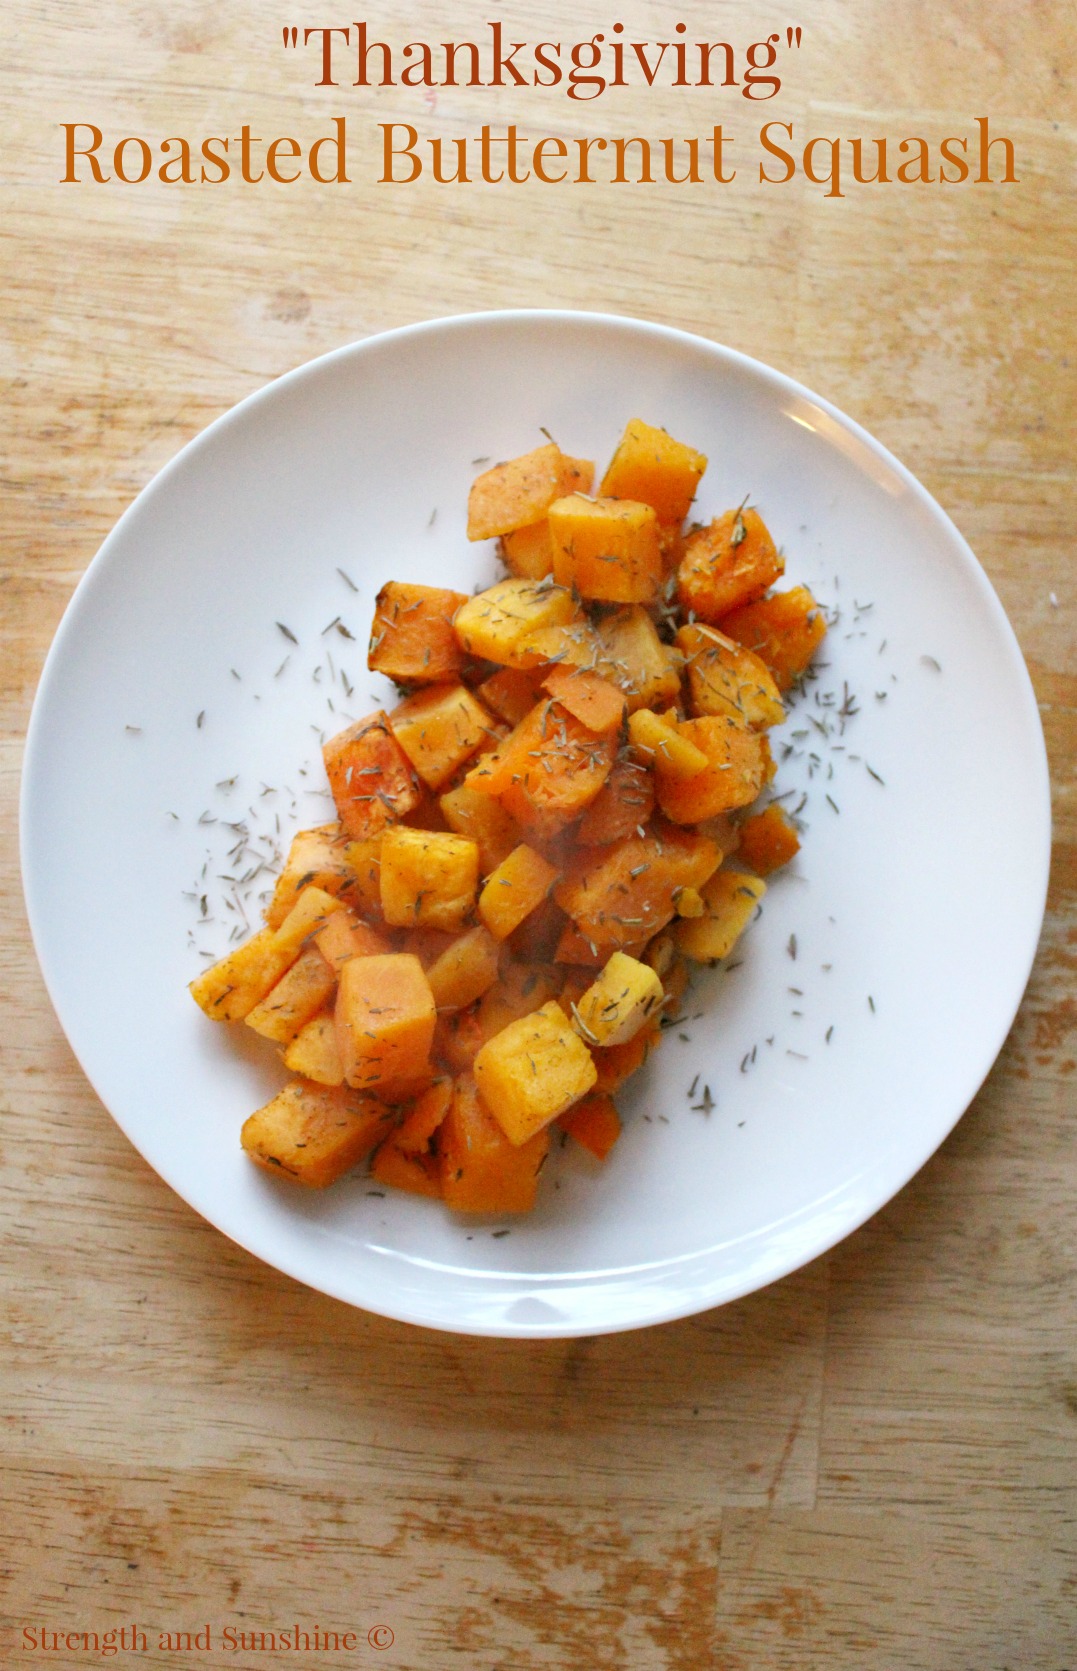 "Thanksgiving" Roasted Butternut Squash | Strength and Sunshine @RebeccaGF666 Perfectly roasted butternut squash with warming "Thanksgiving" and Fall inspired spices including rosemary, sage, and thyme. The perfect gluten-free, vegan, and paleo side dish to dinner.